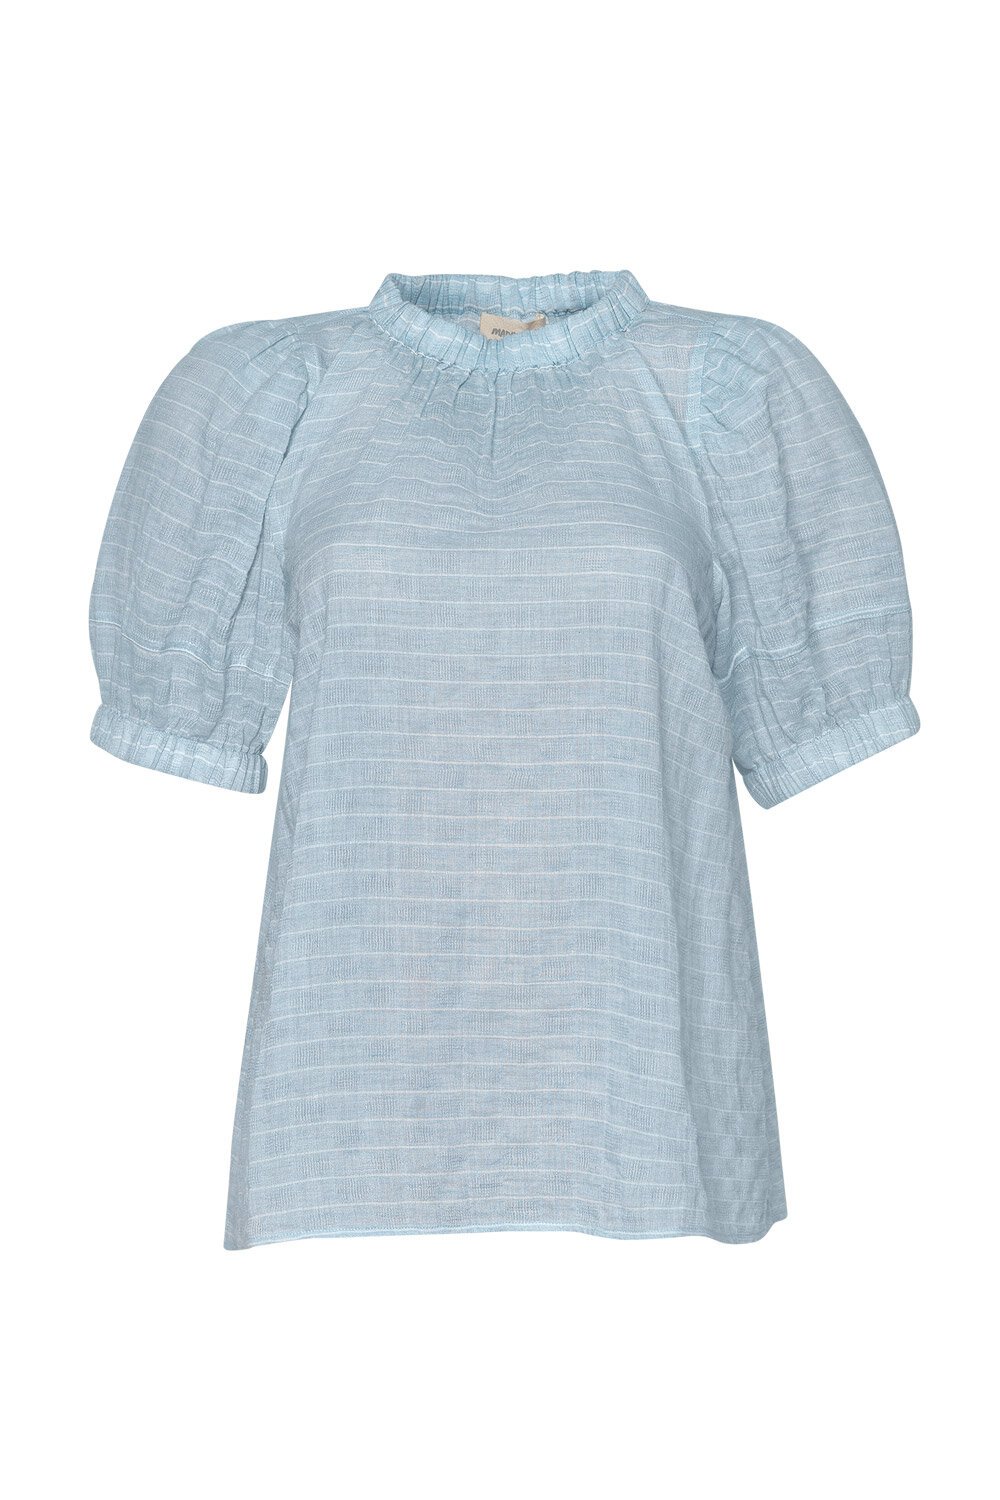 Madly Sweetly STRIPE RIGHT Tee - Brand-Madly Sweetly : Diahann Boutique ...